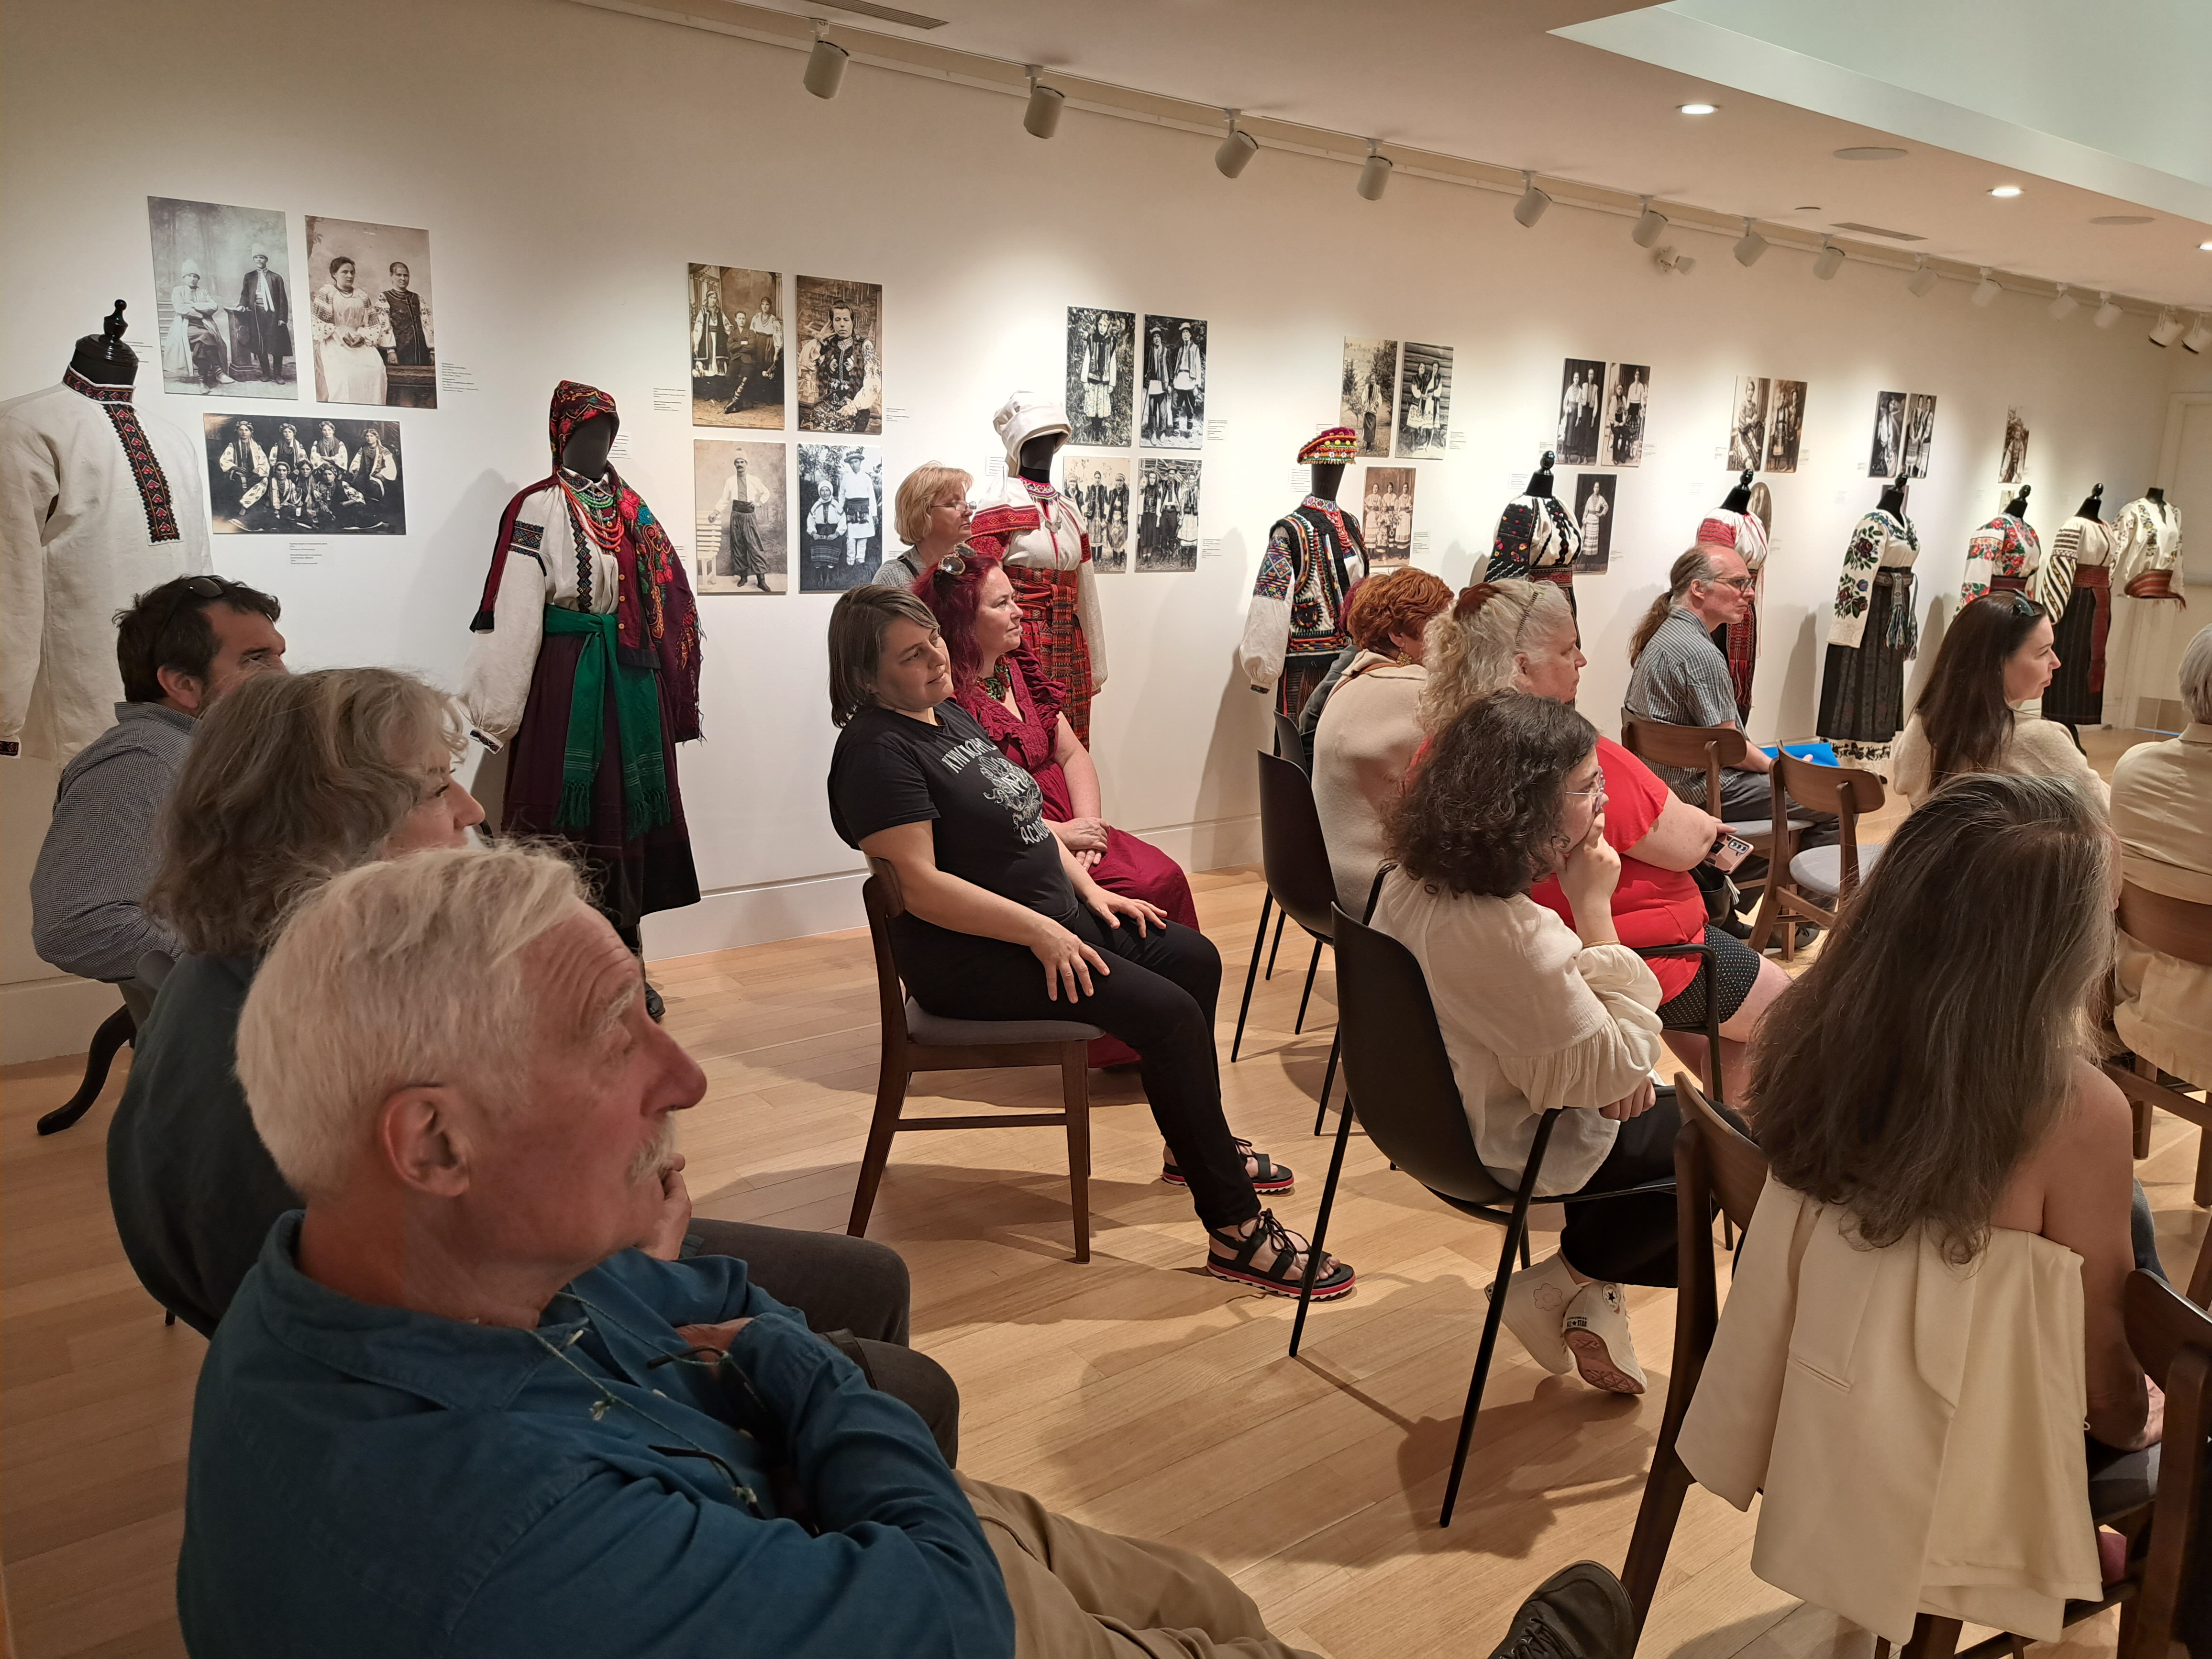 Curatorial Tour of the exhibition of Ukrainian Folk Clothing, May 11, 2023 